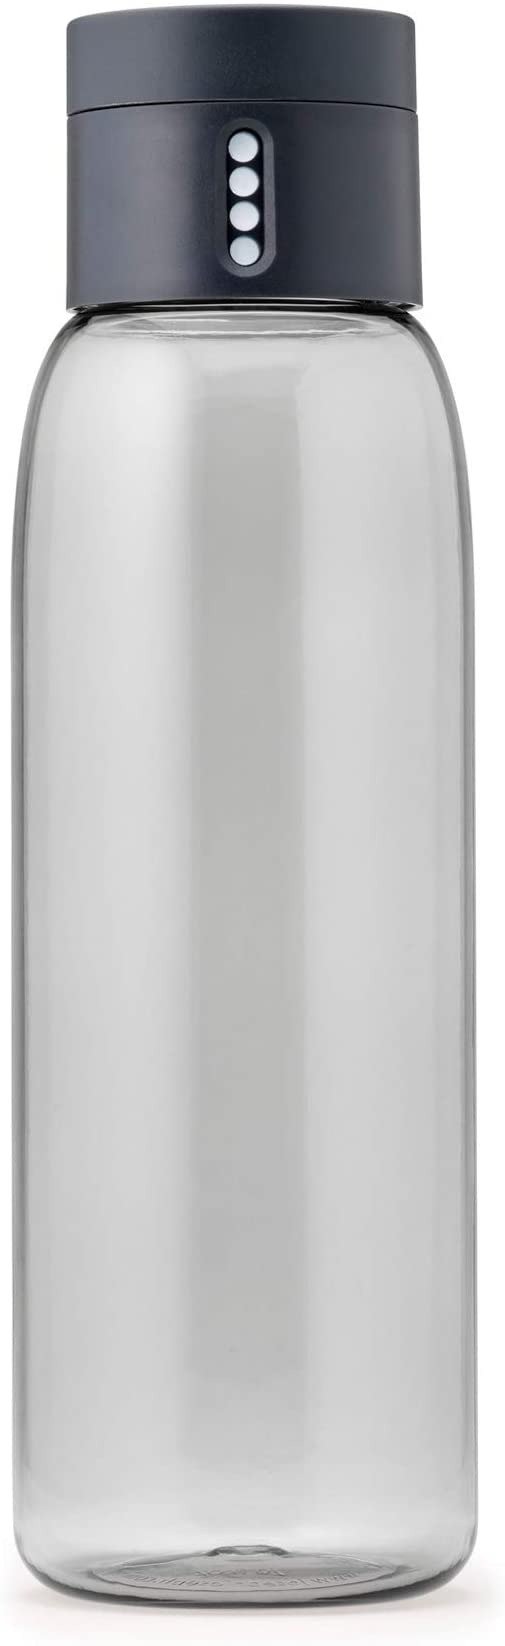 Goodful Travel Mug, Stainless Steel Insulated, Double Wall Vacuum Sealed  Coffee Cup with Leak Proof Lid, 14 Ounce, Cream